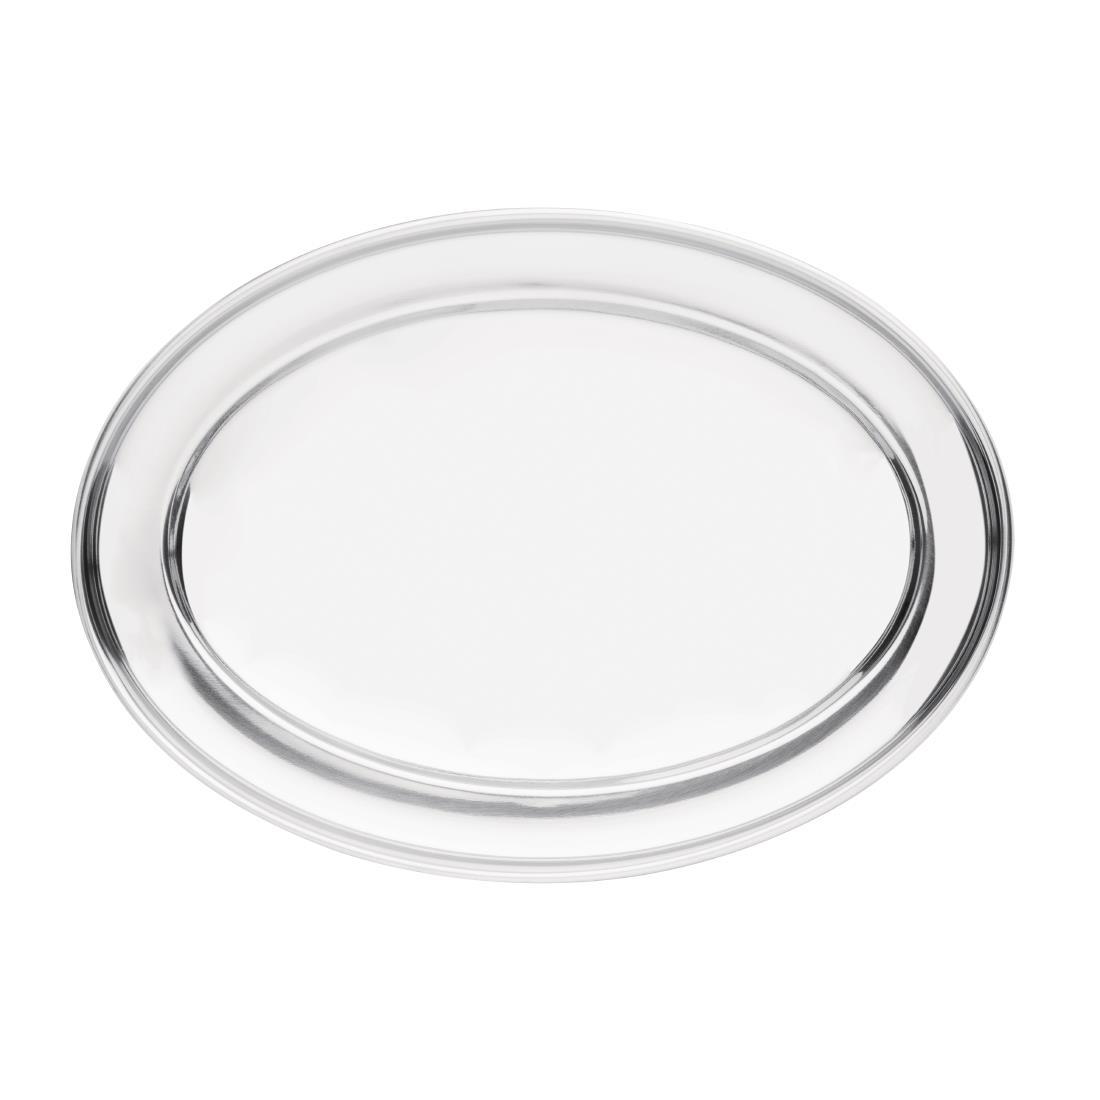 Olympia Stainless Steel Oval Serving Tray 500mm - K367  - 2